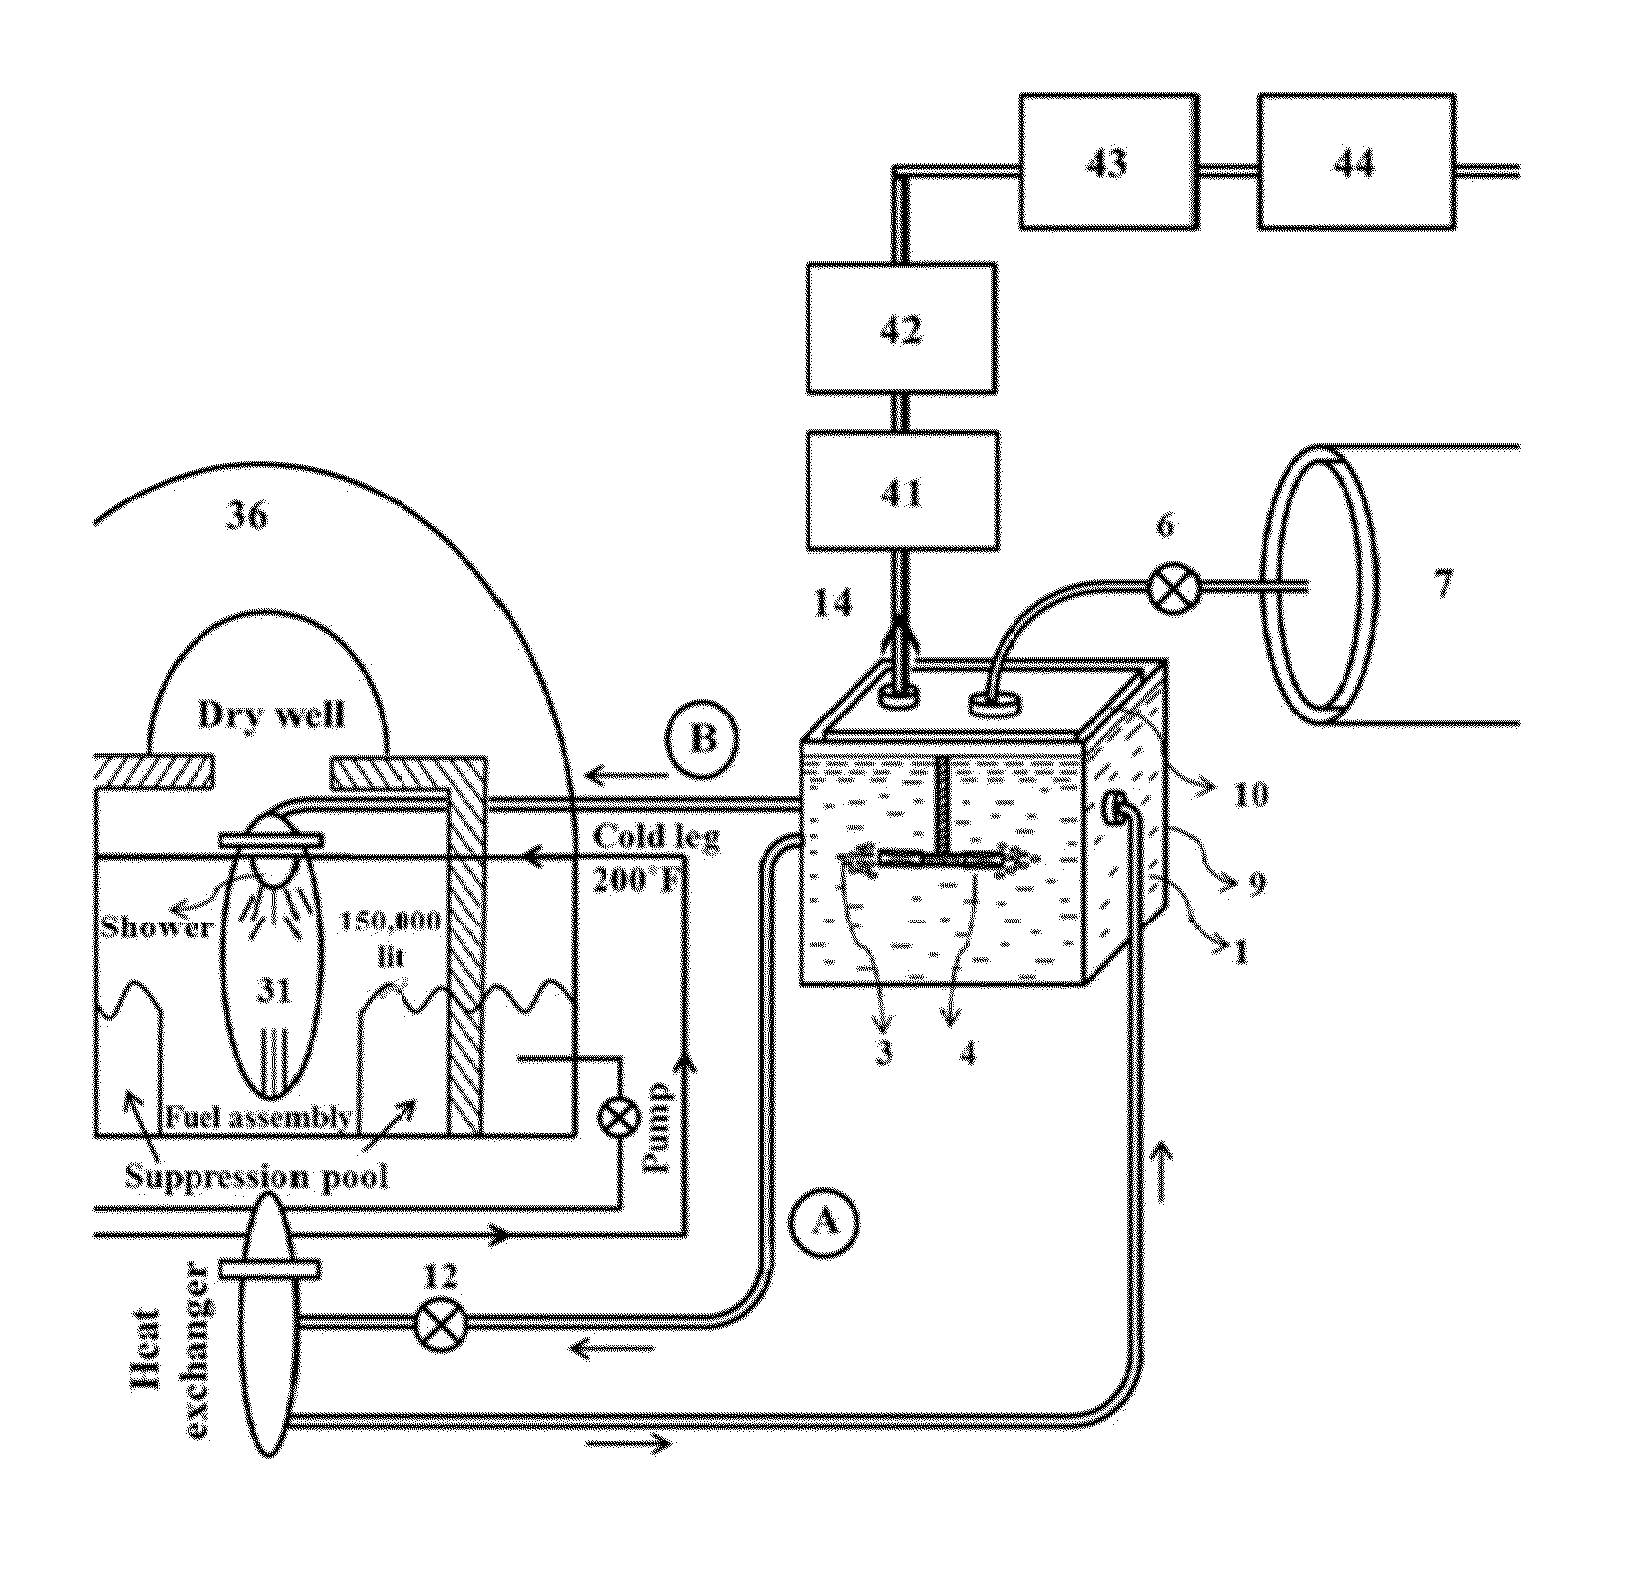 Modified dry ice heat exchanger for heat removal of portable reactors